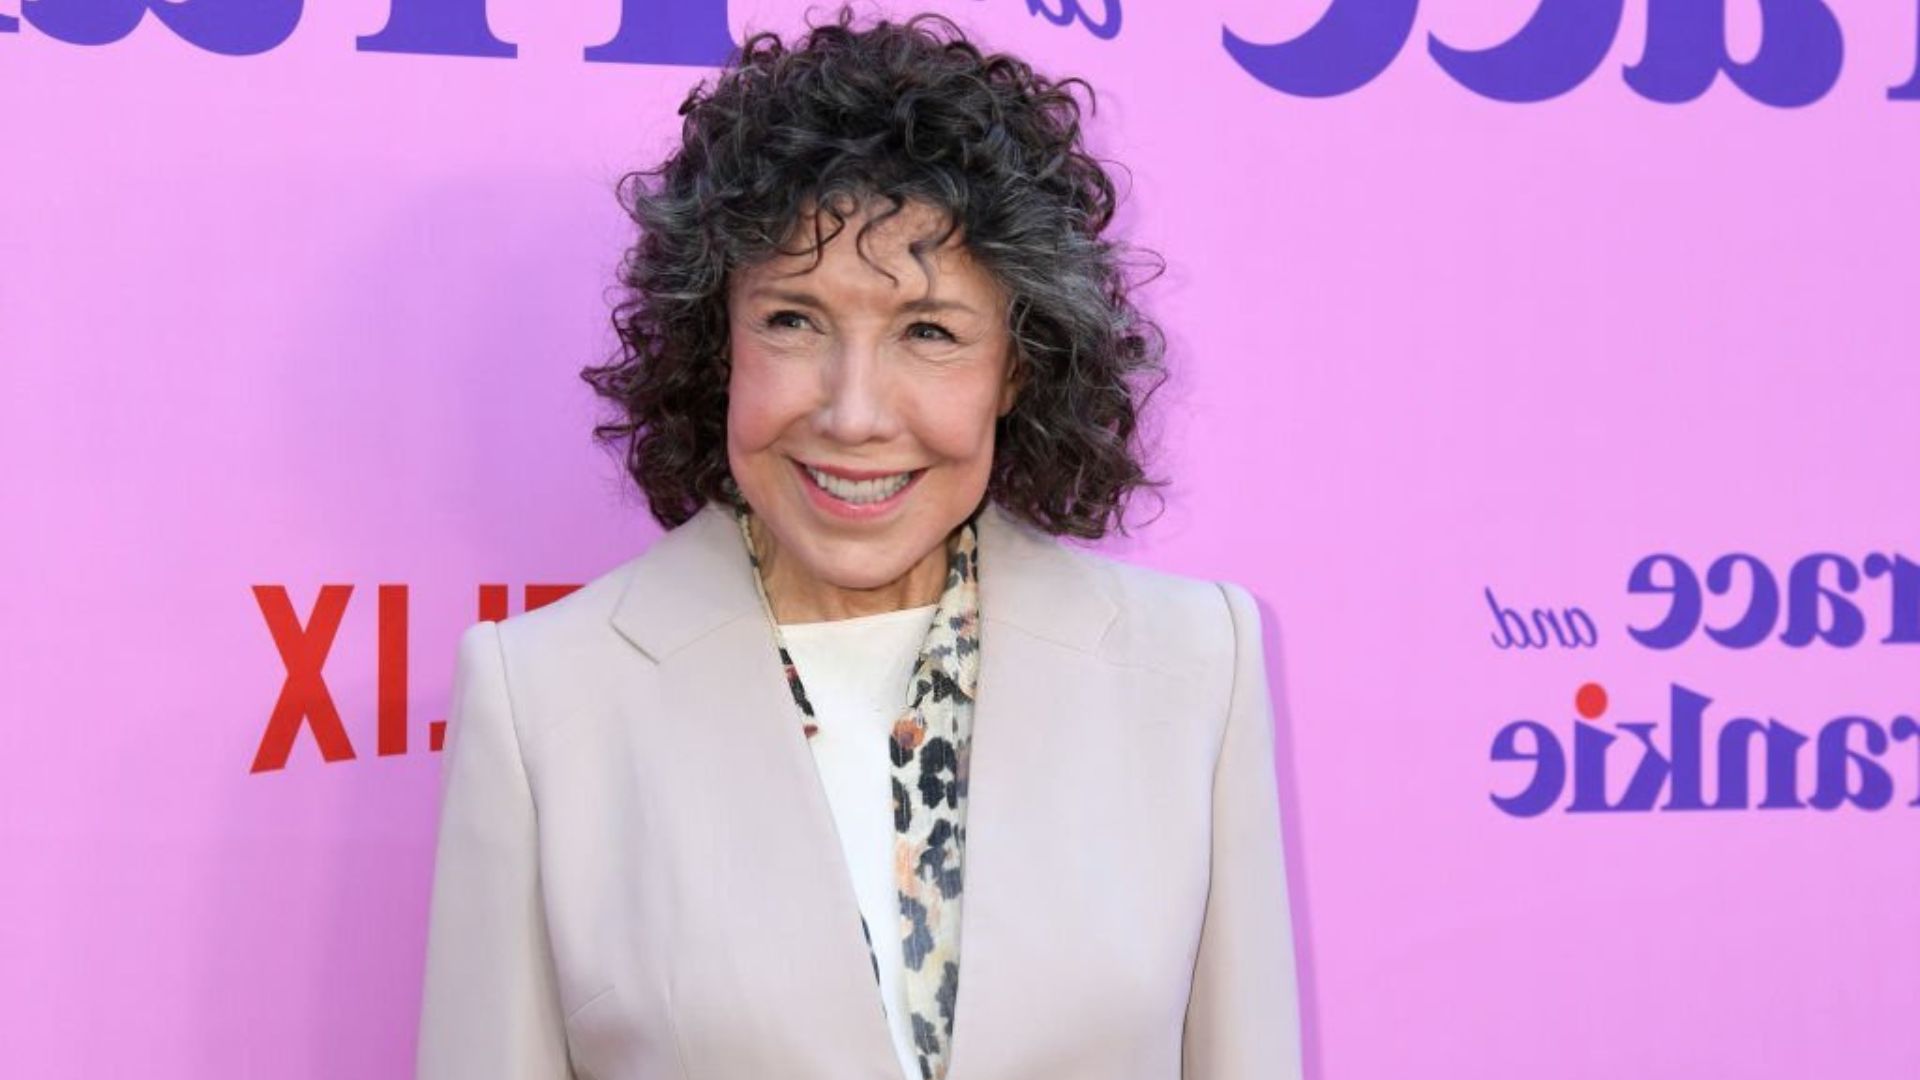 Lily Tomlin's Plastic Surgery